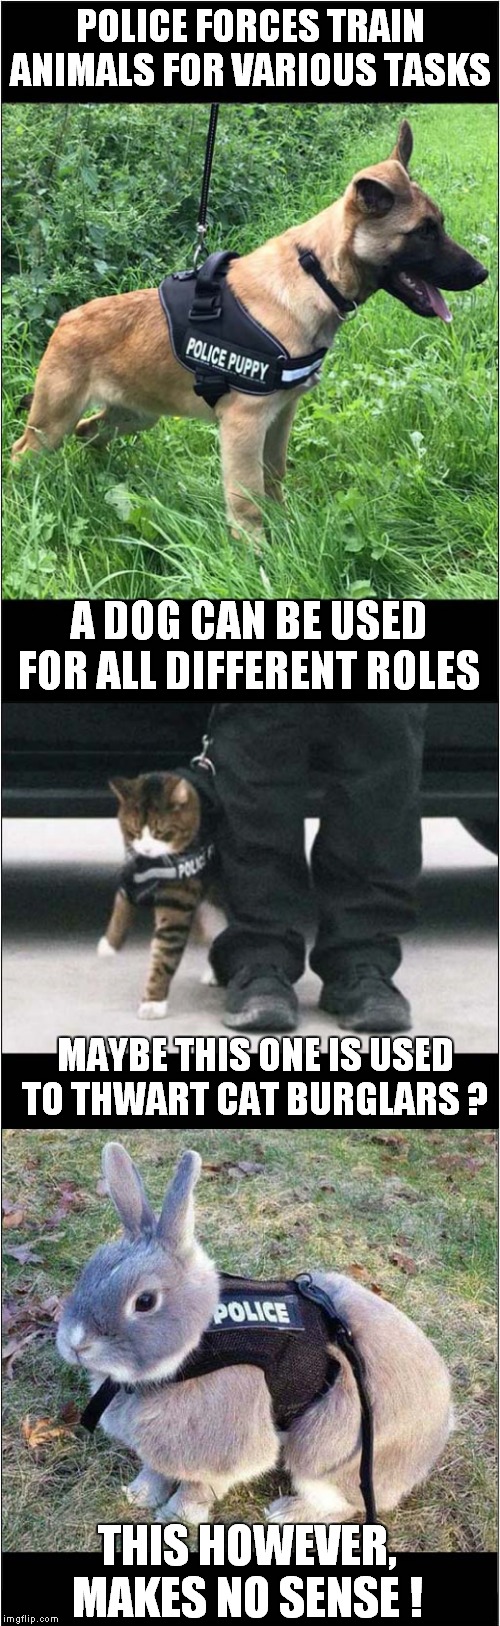 Police Animal Training ? | POLICE FORCES TRAIN ANIMALS FOR VARIOUS TASKS; A DOG CAN BE USED FOR ALL DIFFERENT ROLES; MAYBE THIS ONE IS USED TO THWART CAT BURGLARS ? THIS HOWEVER, MAKES NO SENSE ! | image tagged in fun,police dogs,cats,rabbits | made w/ Imgflip meme maker